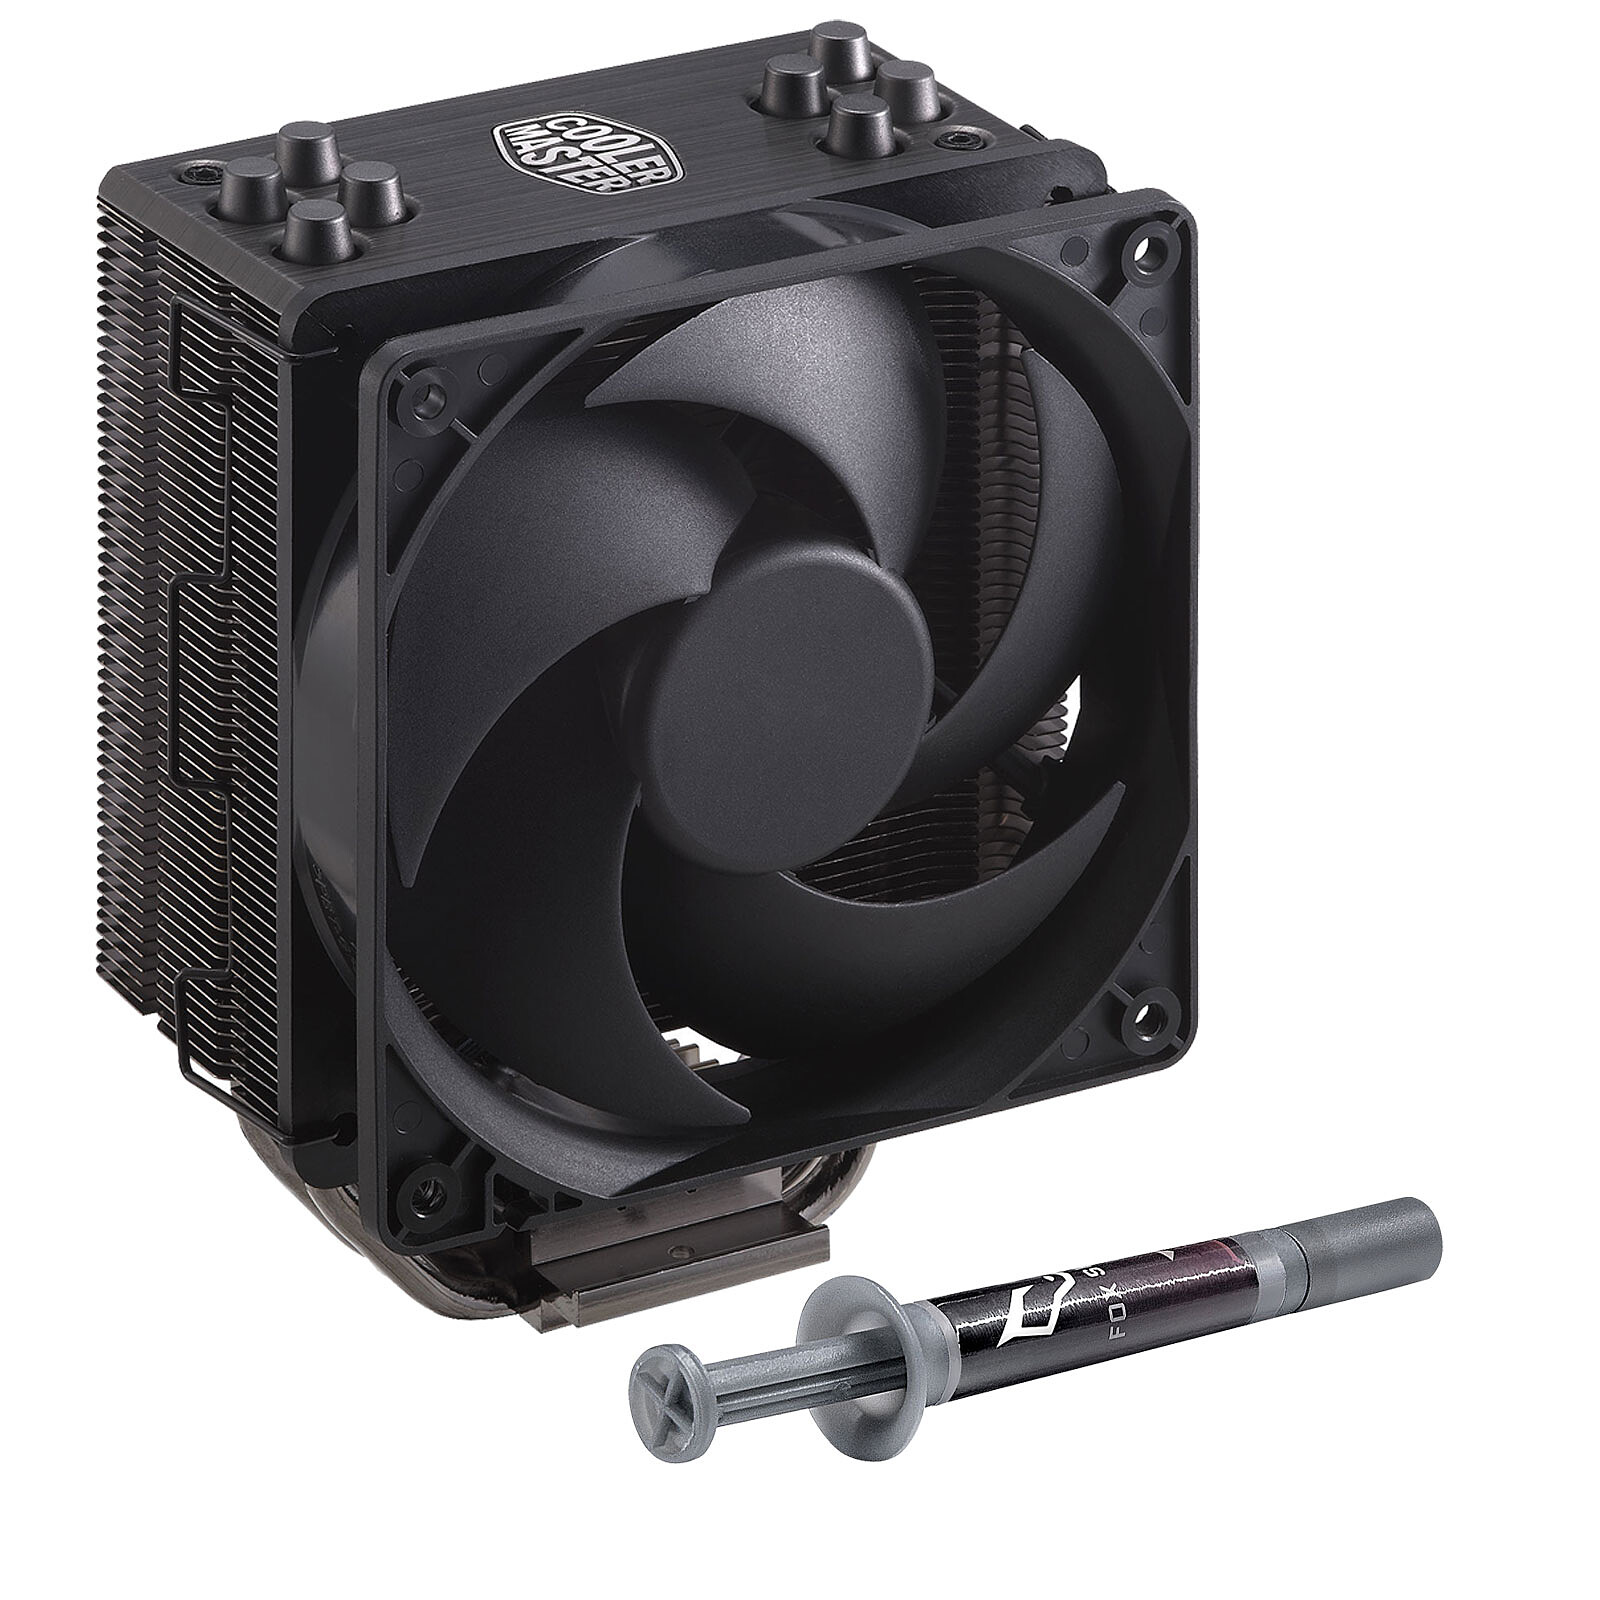 i have core i5 10400f with stock cooler, can i check water cooler